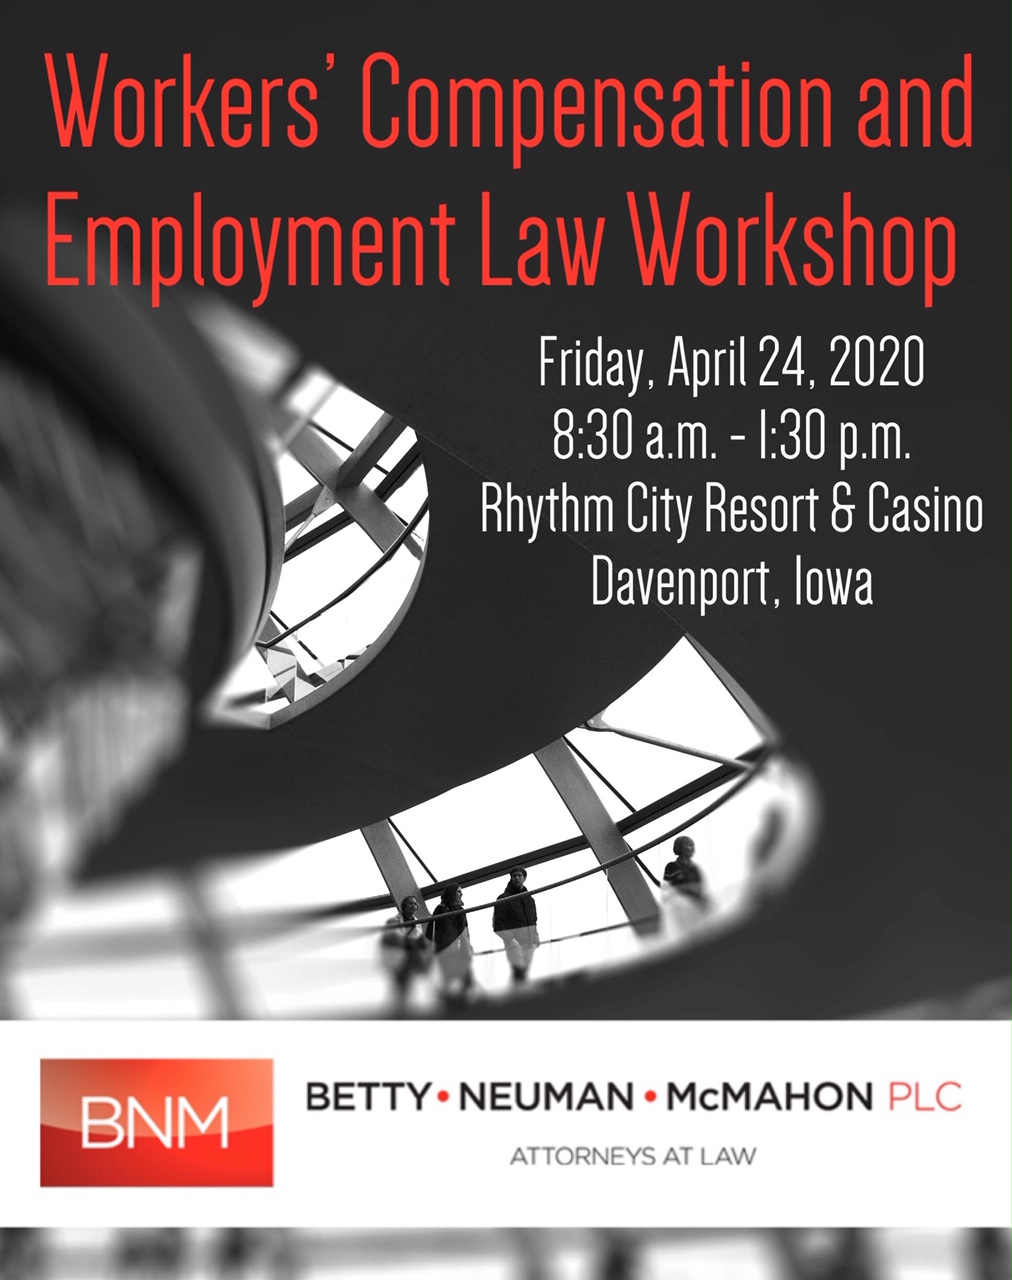 Workers Compensation And Employment Law Workshop | Betty Neuman McMahon PLC | Attorneys At Law